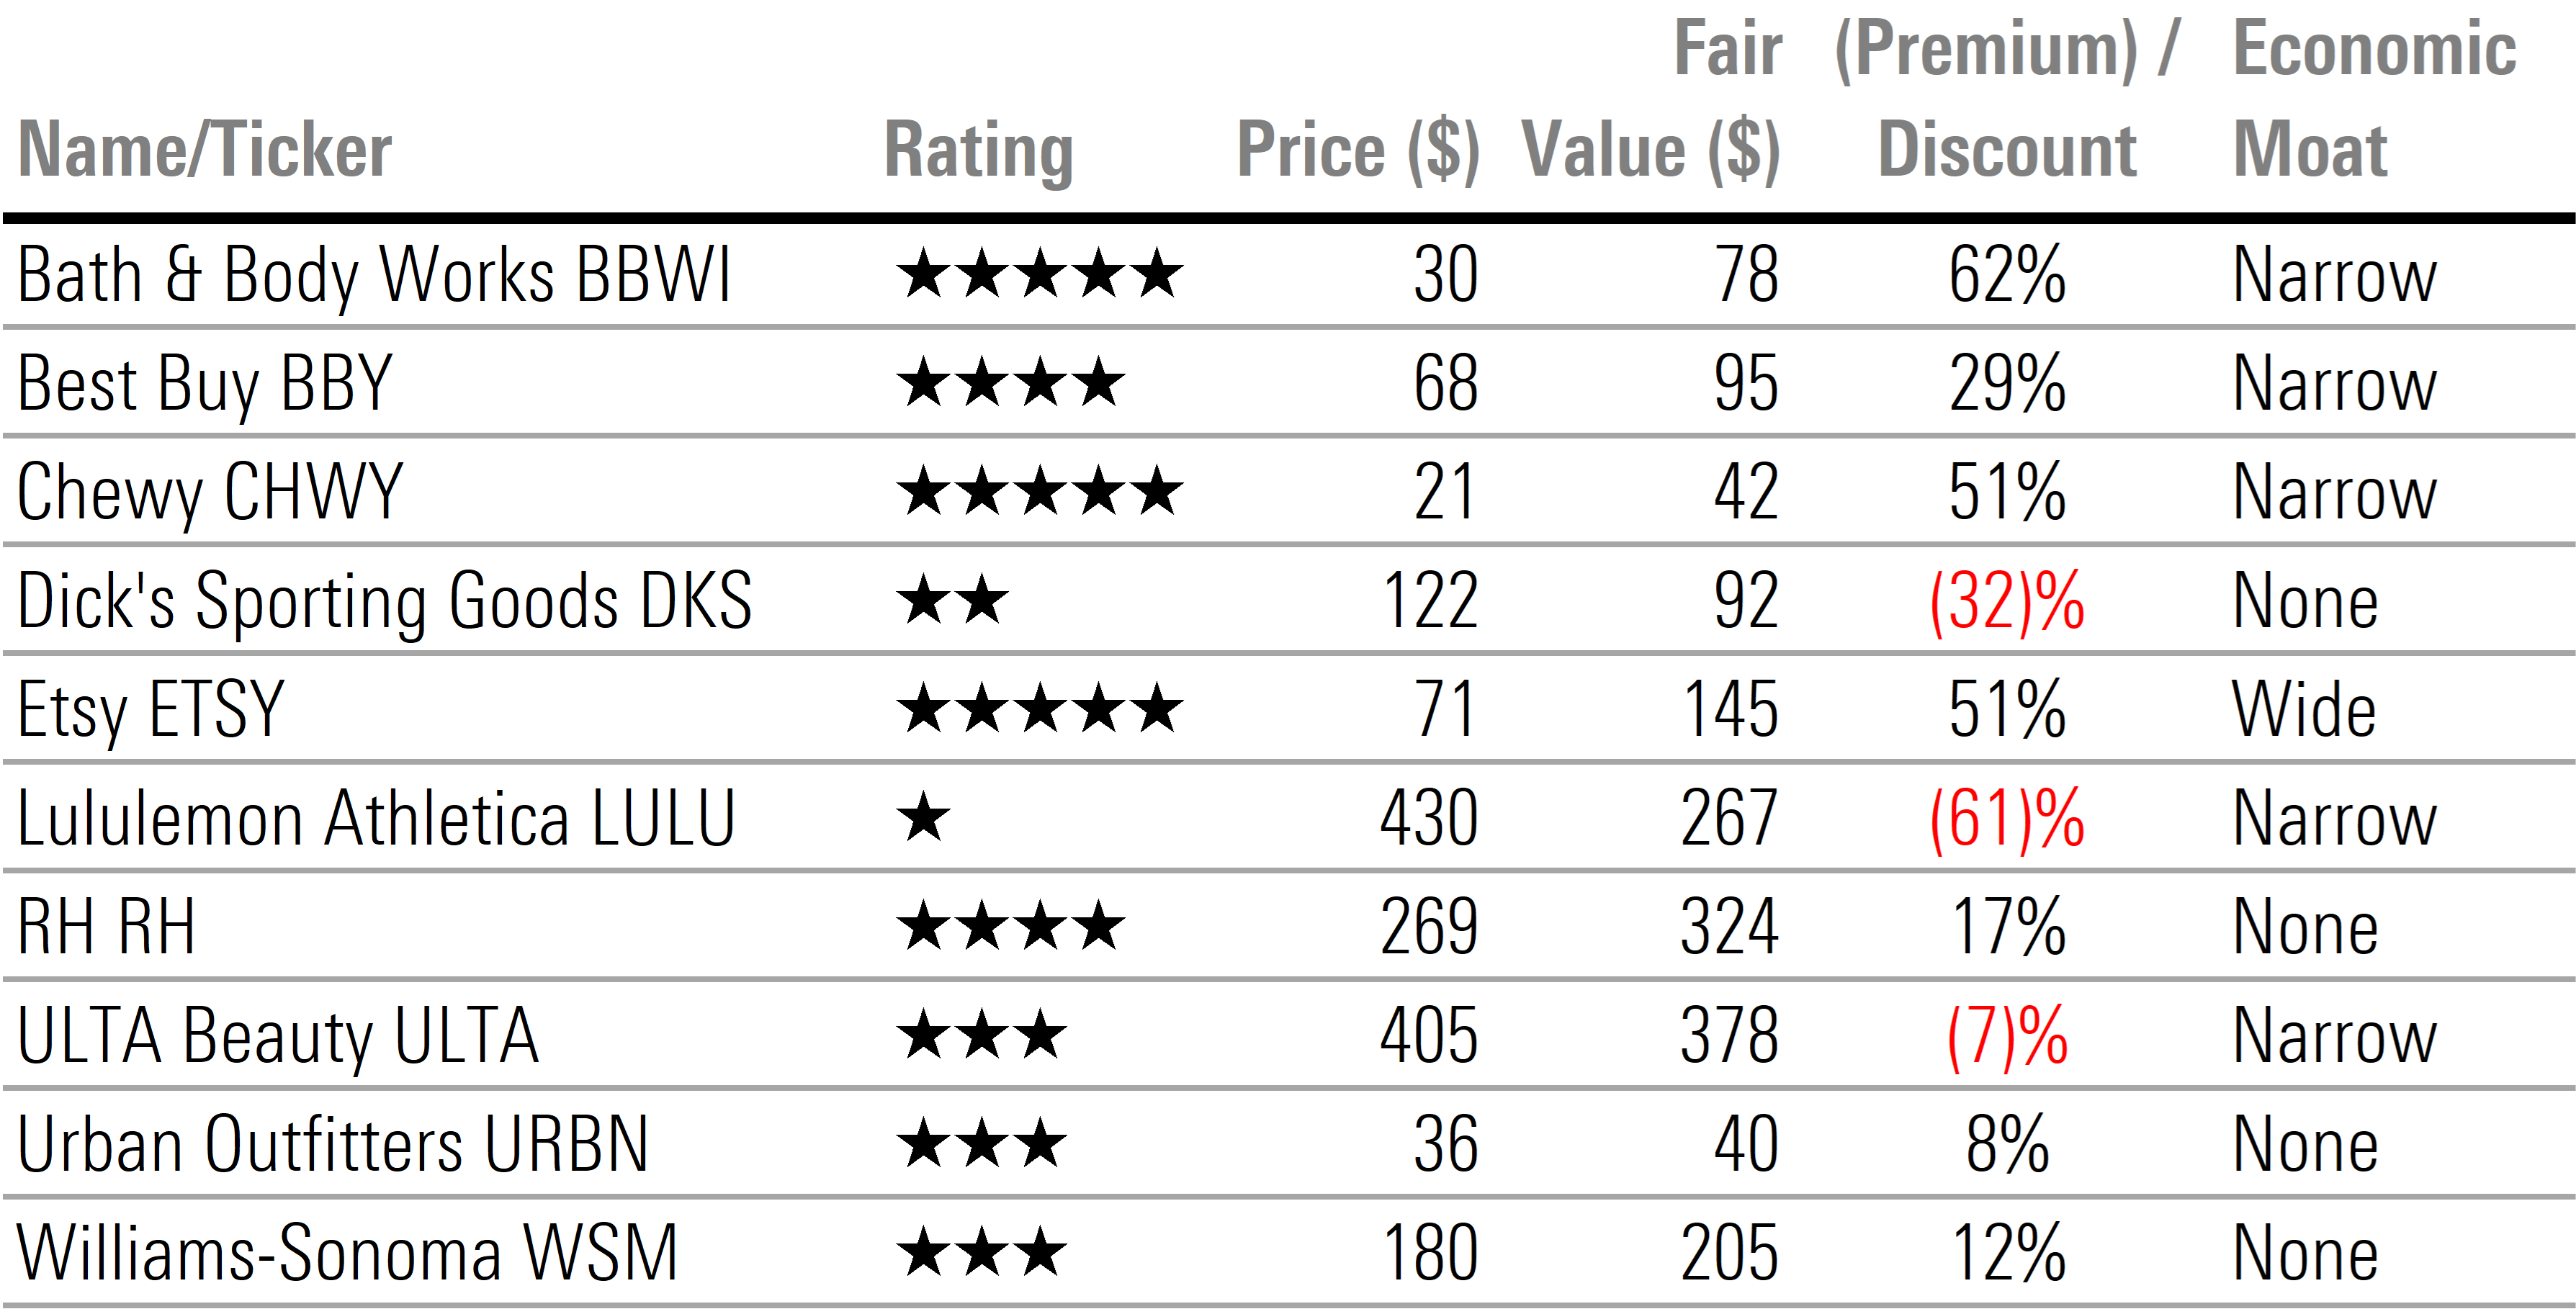 Table displaying star rating, price, fair value, premium or discount, and economic moat rating for stocks under Morningstar coverage in the specialty retail sector.